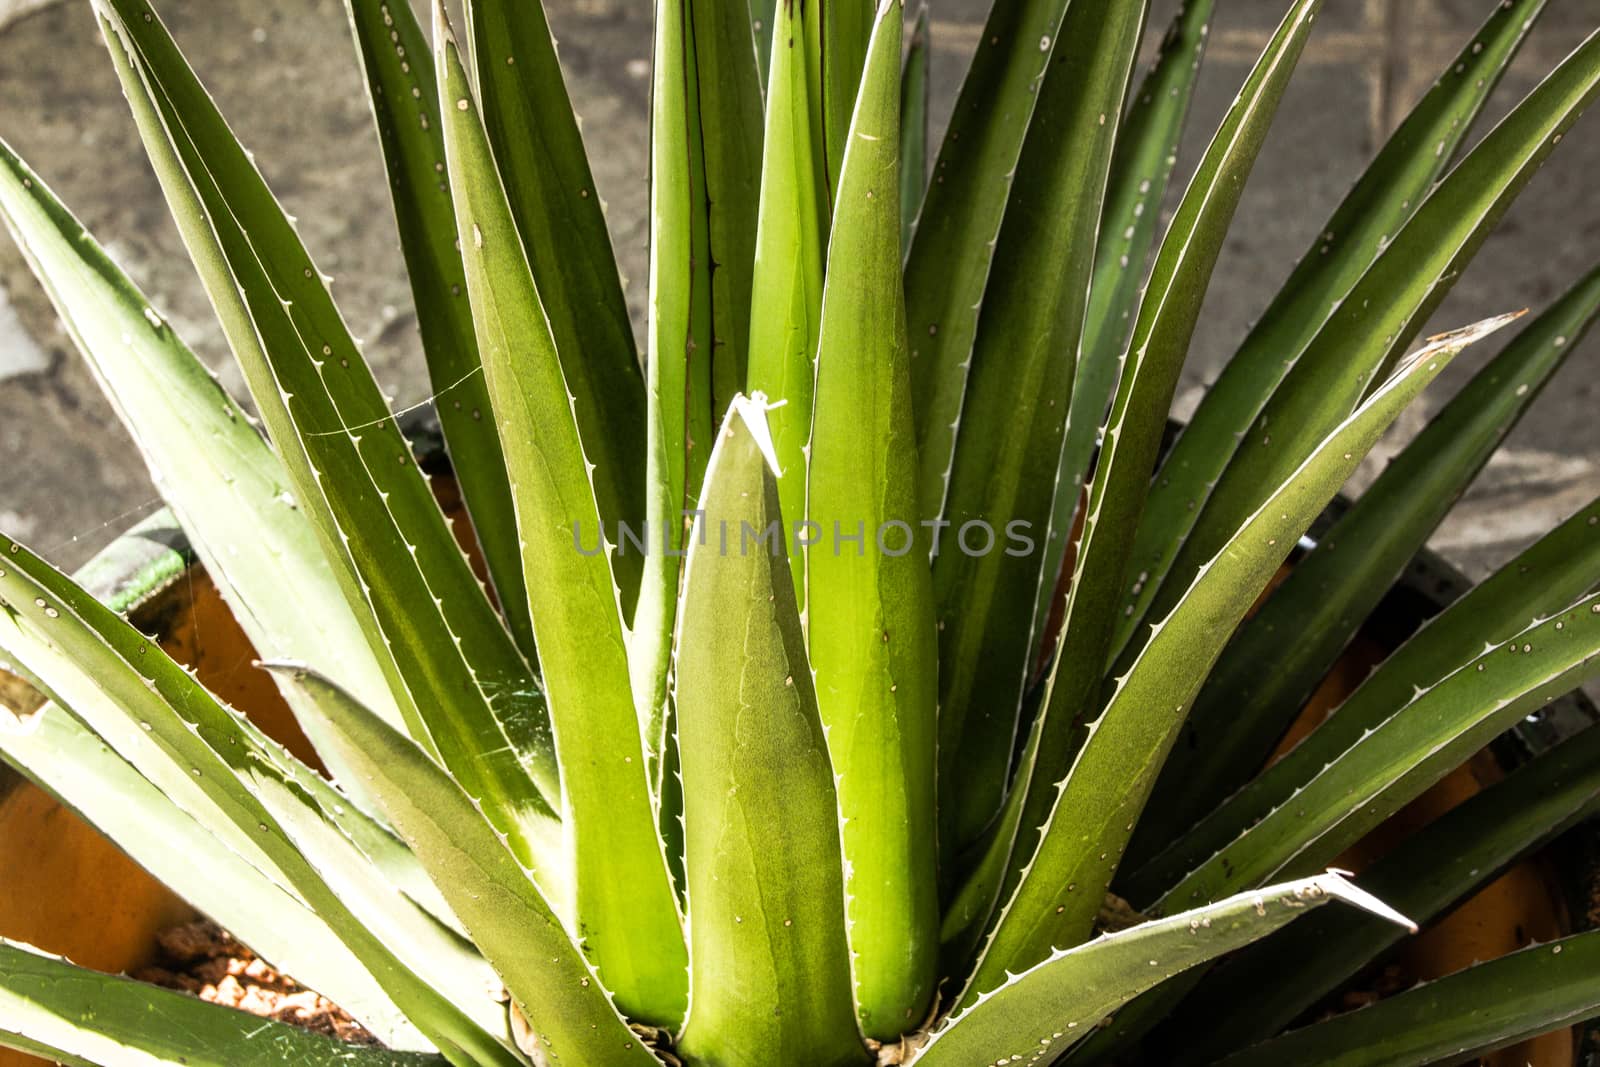 Detail of some maguey plants